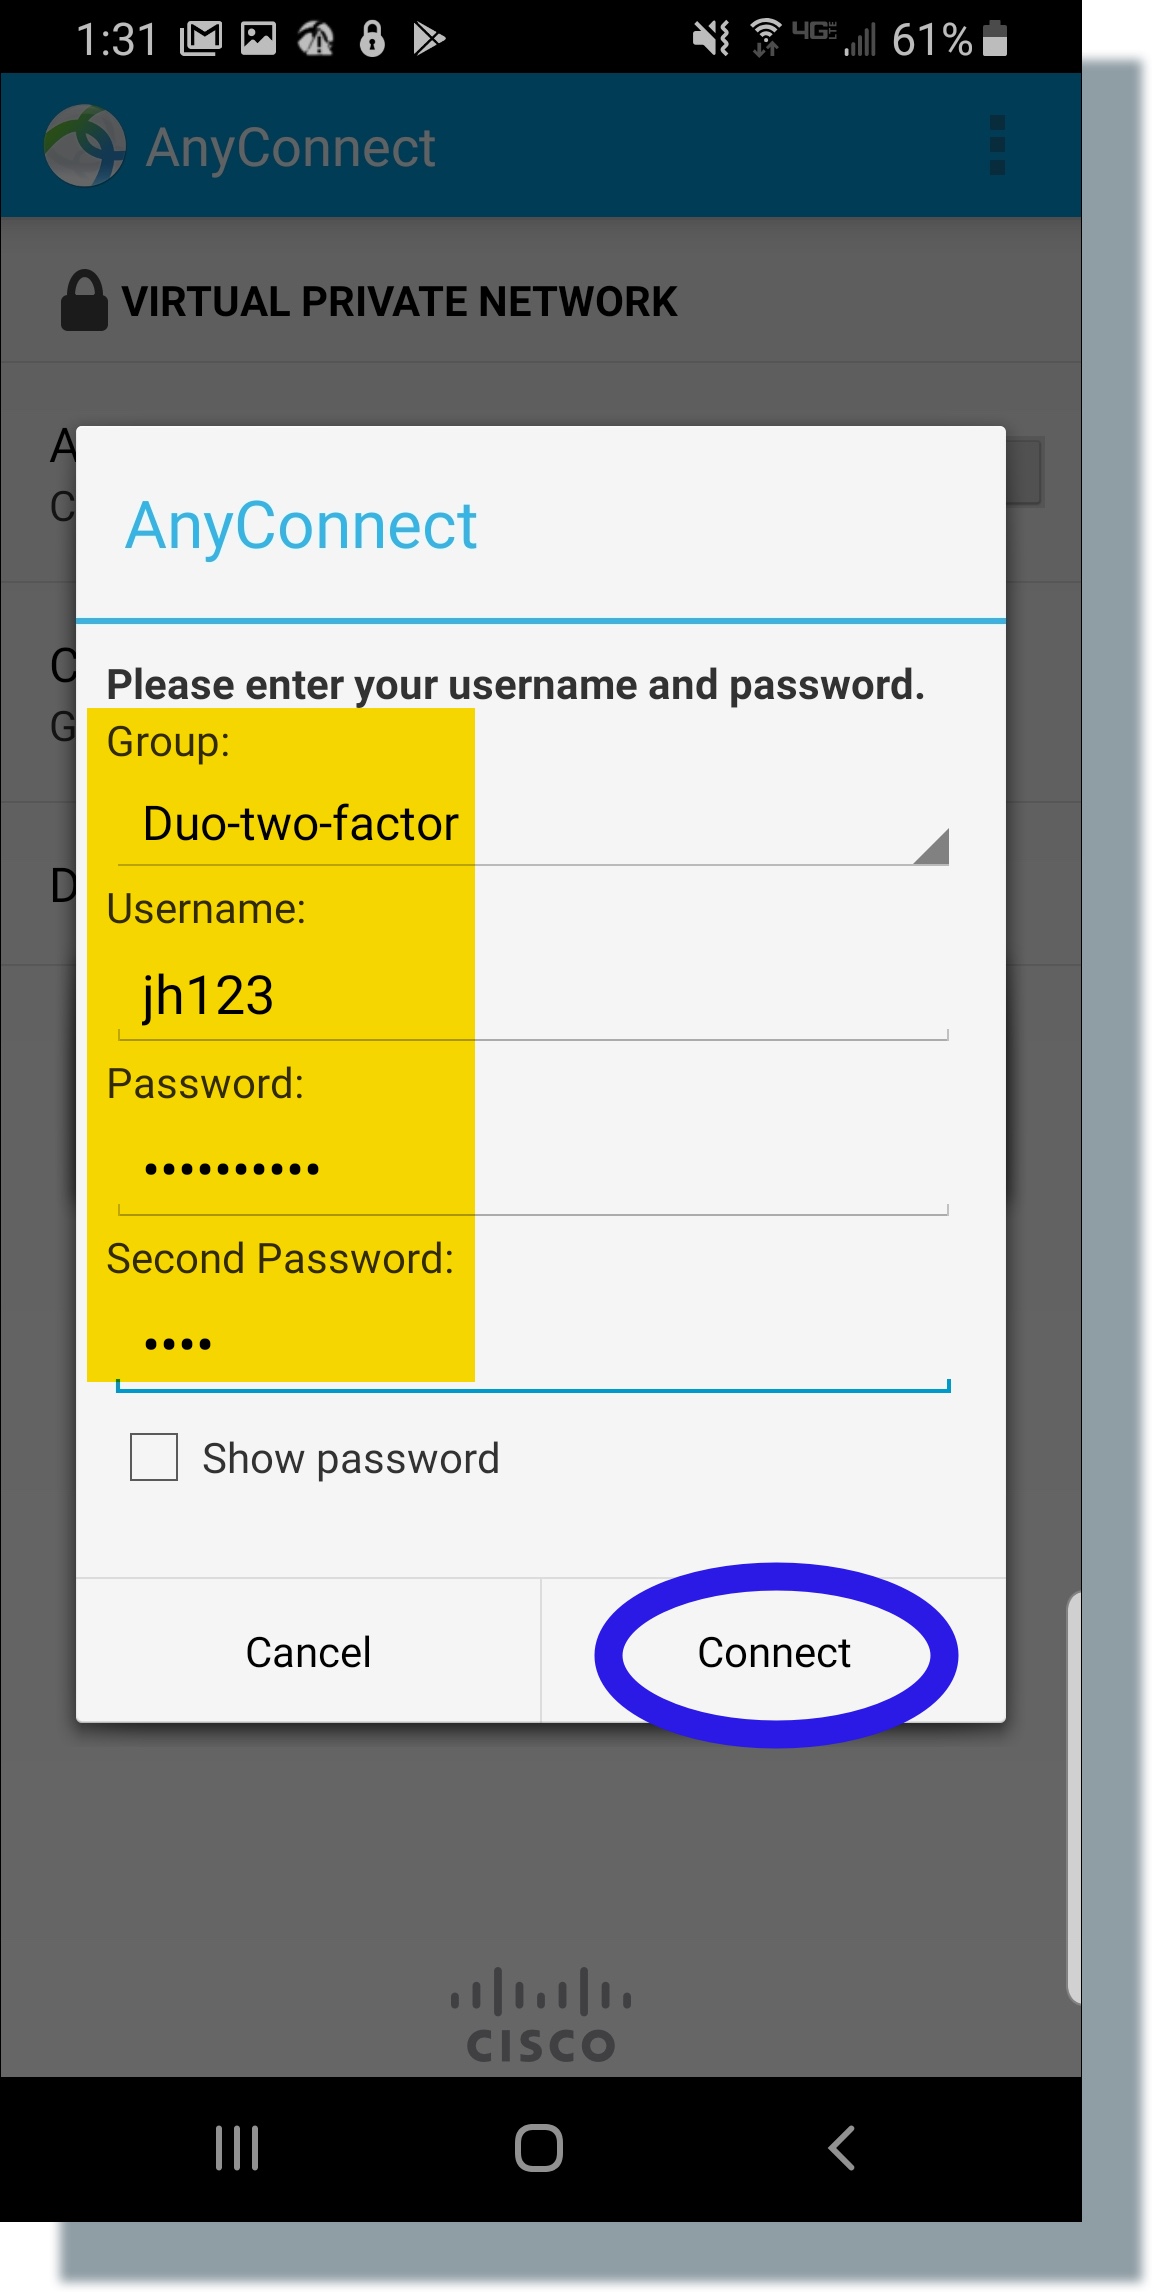 Enter NetID, password, 'push' for second password, then click 'Connect'